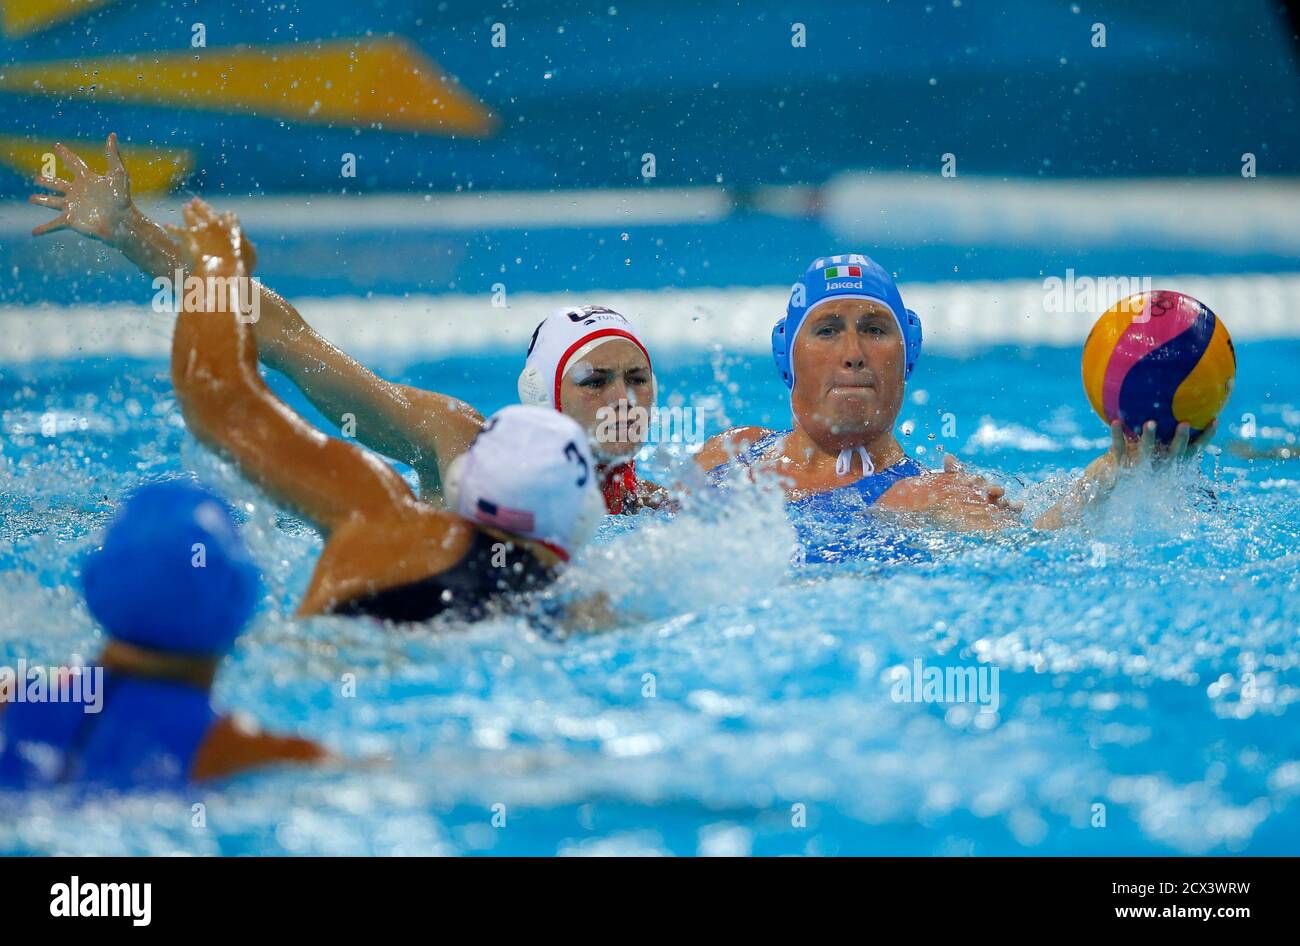 Italy's Elisa Casanova (R) is challenged by Melissa Seidemann (L) and  Jessica Steffens of U.S. during their women's water polo quarterfinal round  at the Water Polo Arena during the London 2012 Olympic